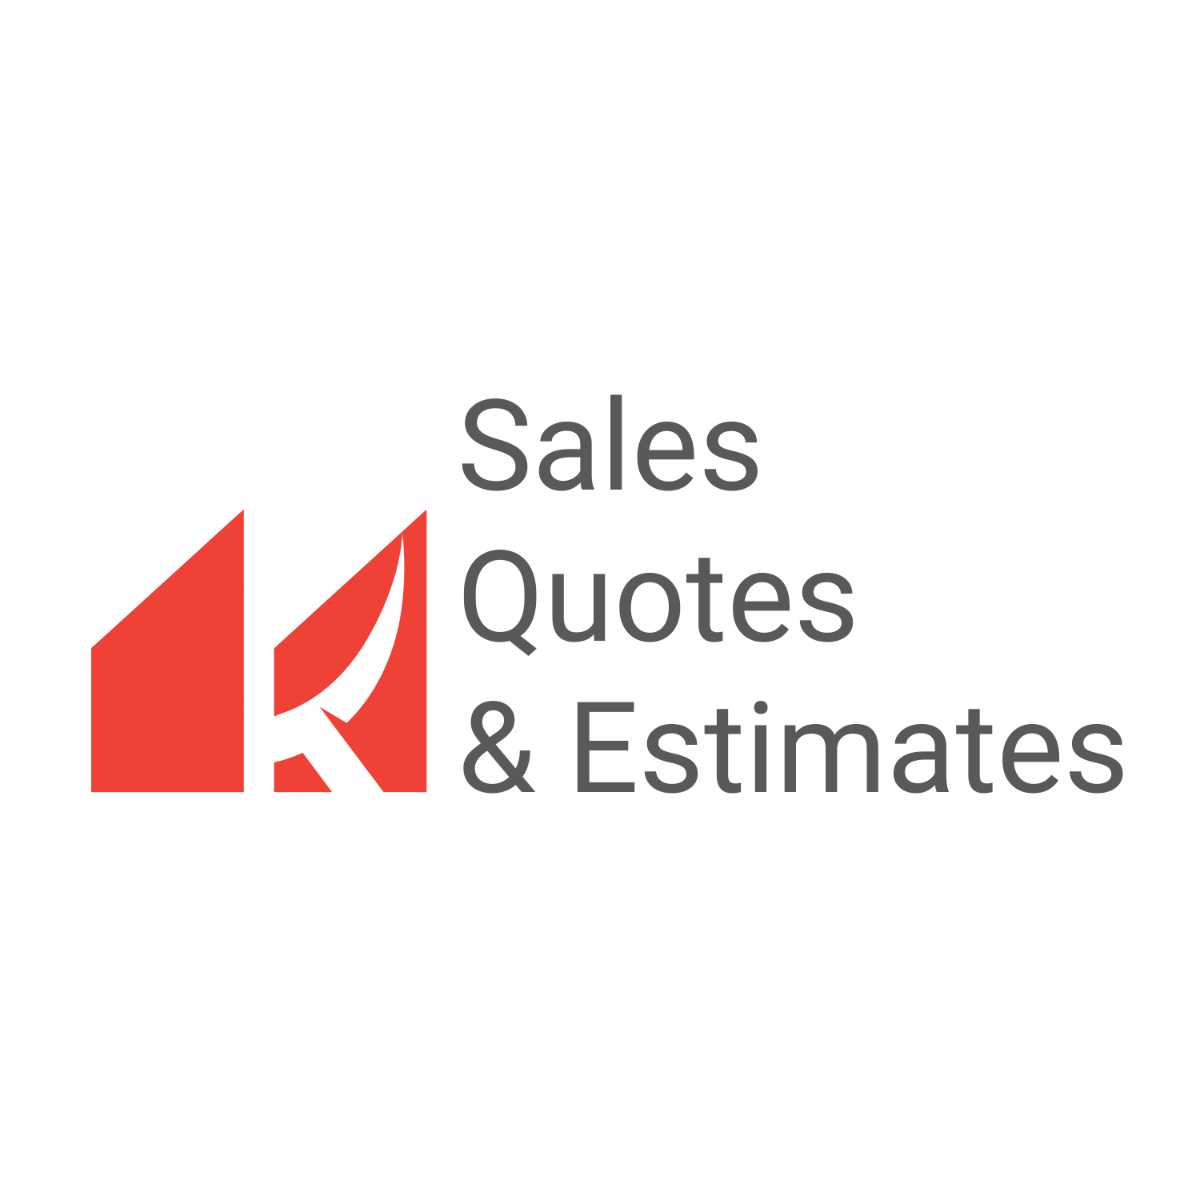 Sales Quotes and Estimates Logo Template